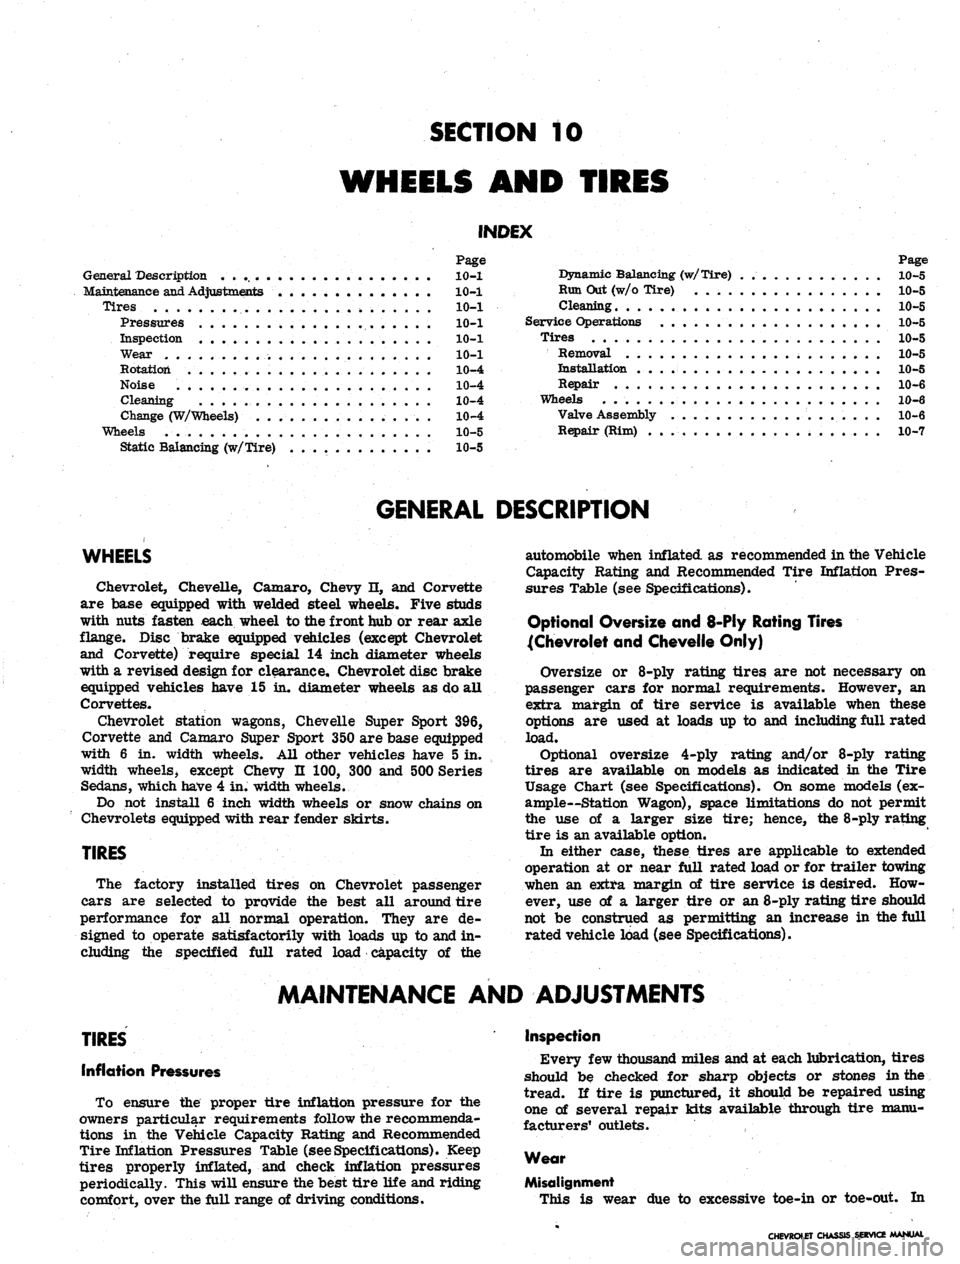 CHEVROLET CAMARO 1967 1.G Chassis Owners Manual 
SECTION 10

WHEELS AND TIRES

INDEX

Page

General Description
 10-1

Maintenance
 and
 Adjustments
 .............. 10—1

Tires
 10-1

Pressures . 10-1

Inspection 10-1

Wear 10-1

Rotation 10-4

N